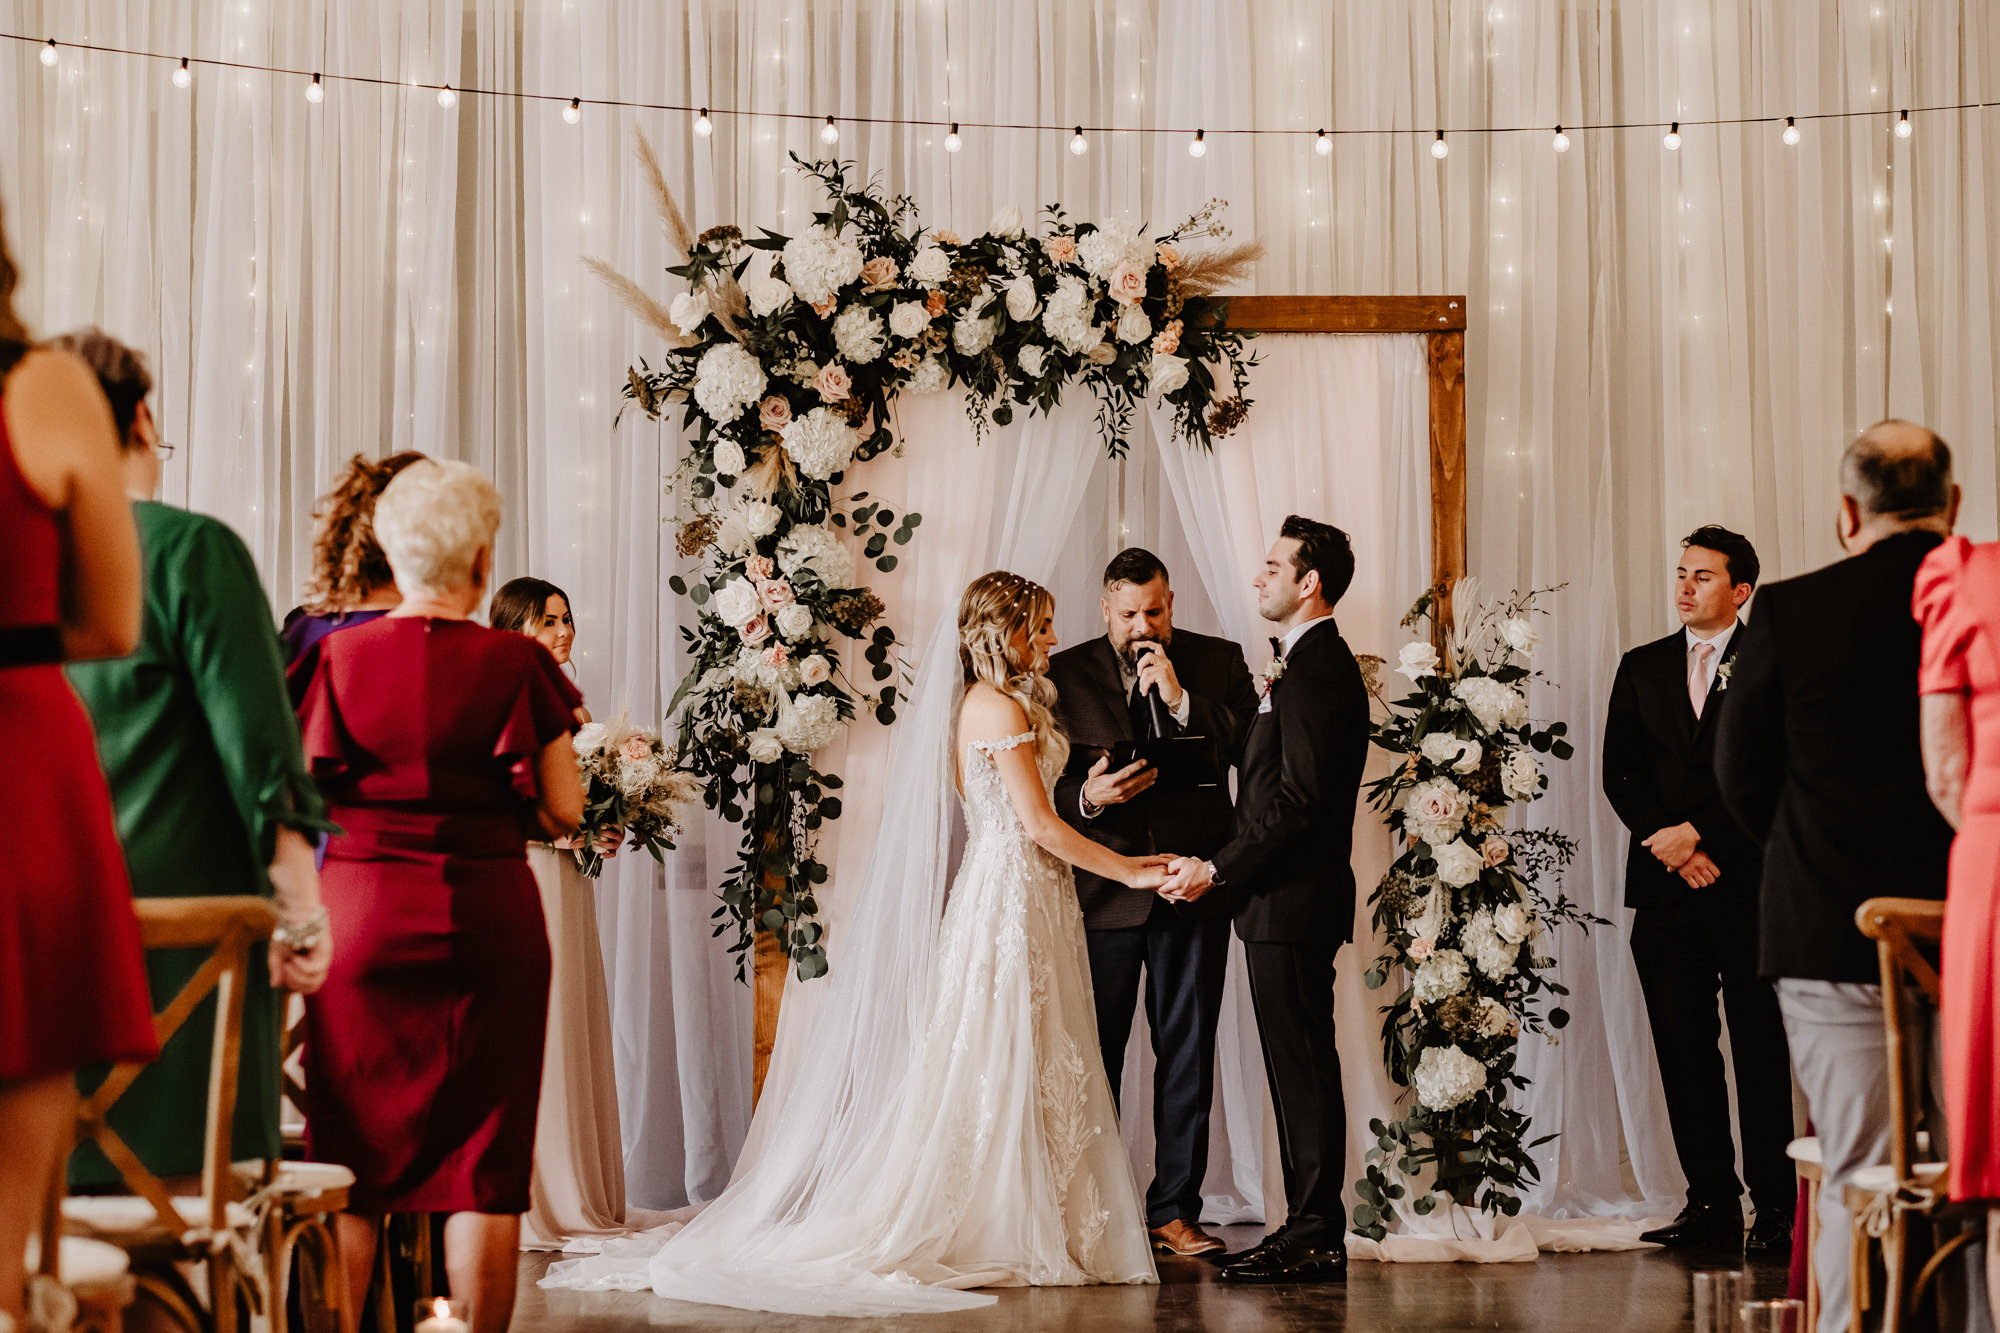 Bride and Groom Exchanging Wedding Vows During Neutral Boho Modern Wedding Ceremony Decor, Wooden Cross Back Chairs, Hanging String Lights, Wooden Arch with White Linens, Lush Greenery, White Flowers and Pampas Grass Floral Arrangements | Tampa Bay Wedding Planner Taylored Affairs | Wedding Rentals Gabro Event Services